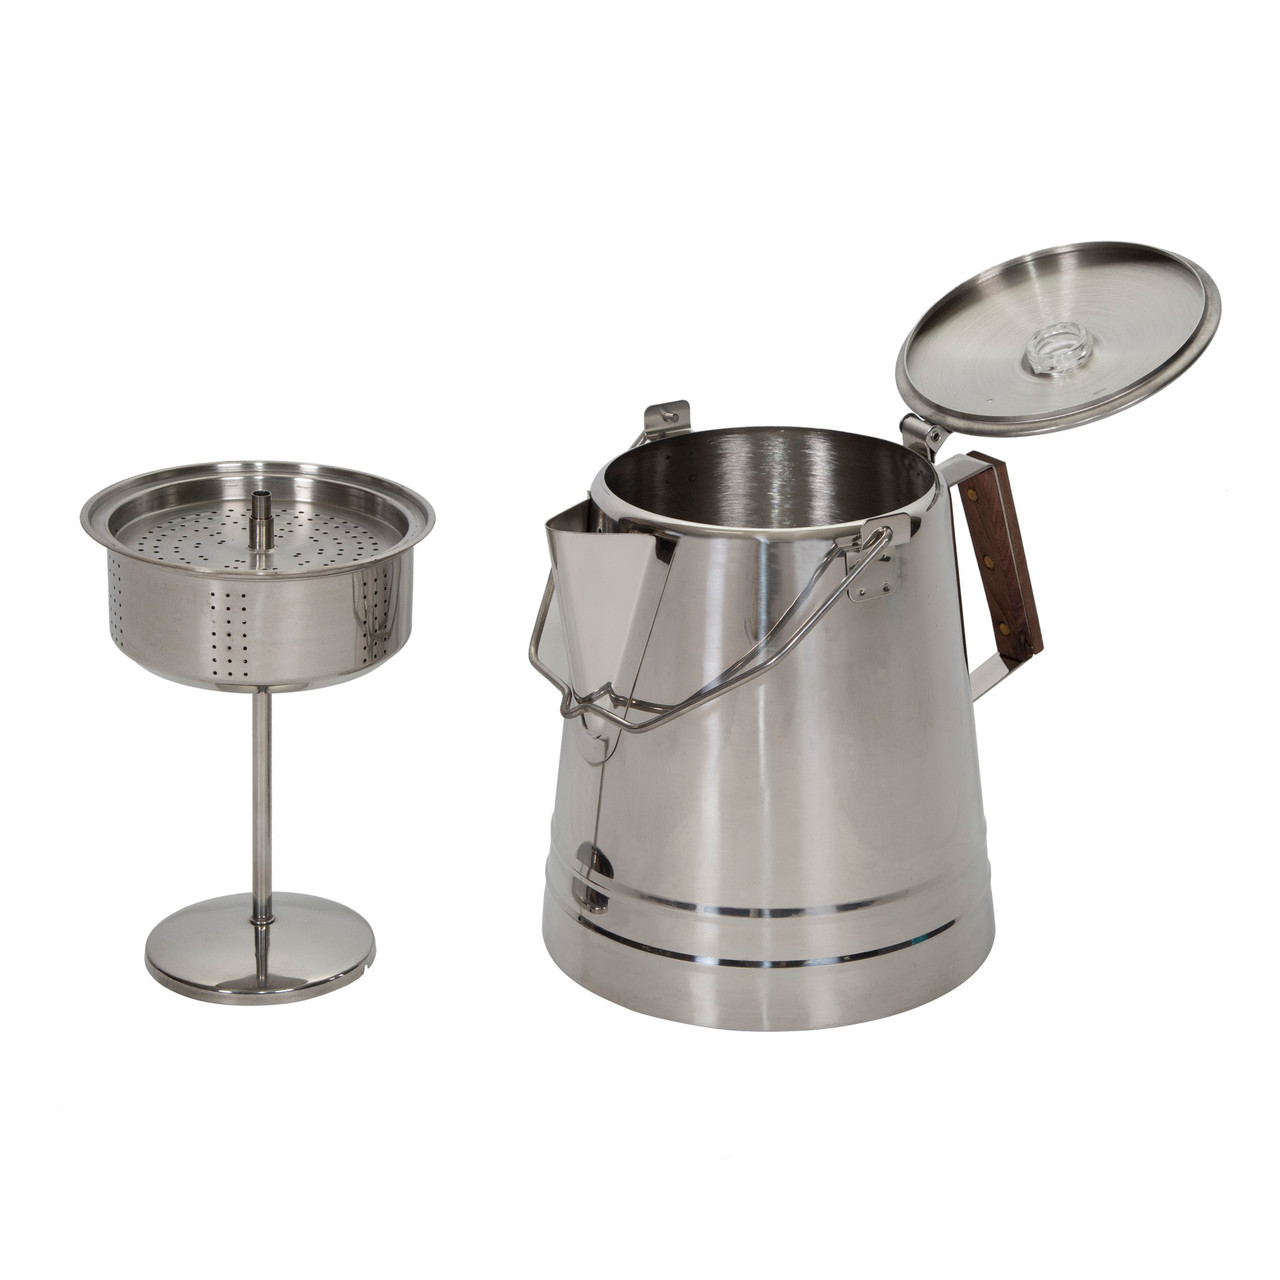 L.L.Bean Stainless-Steel Percolator, 14 Cup